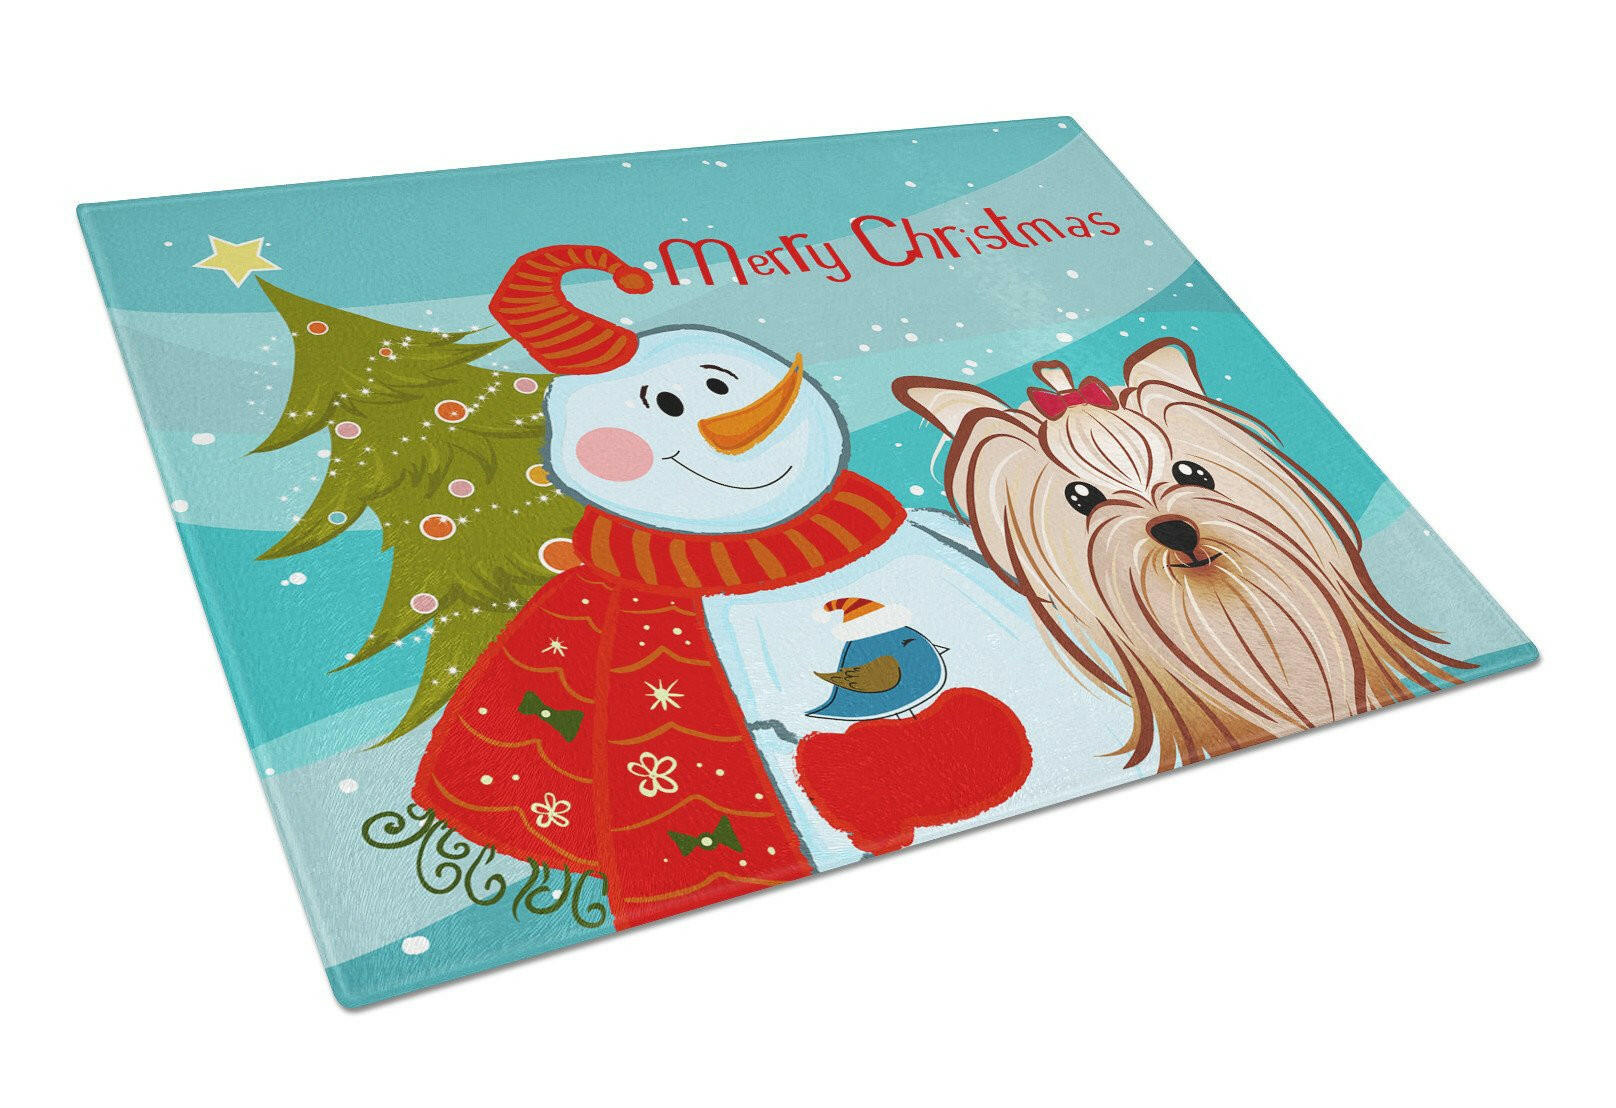 Snowman with Yorkie Yorkshire Terrier Glass Cutting Board Large BB1824LCB by Caroline's Treasures